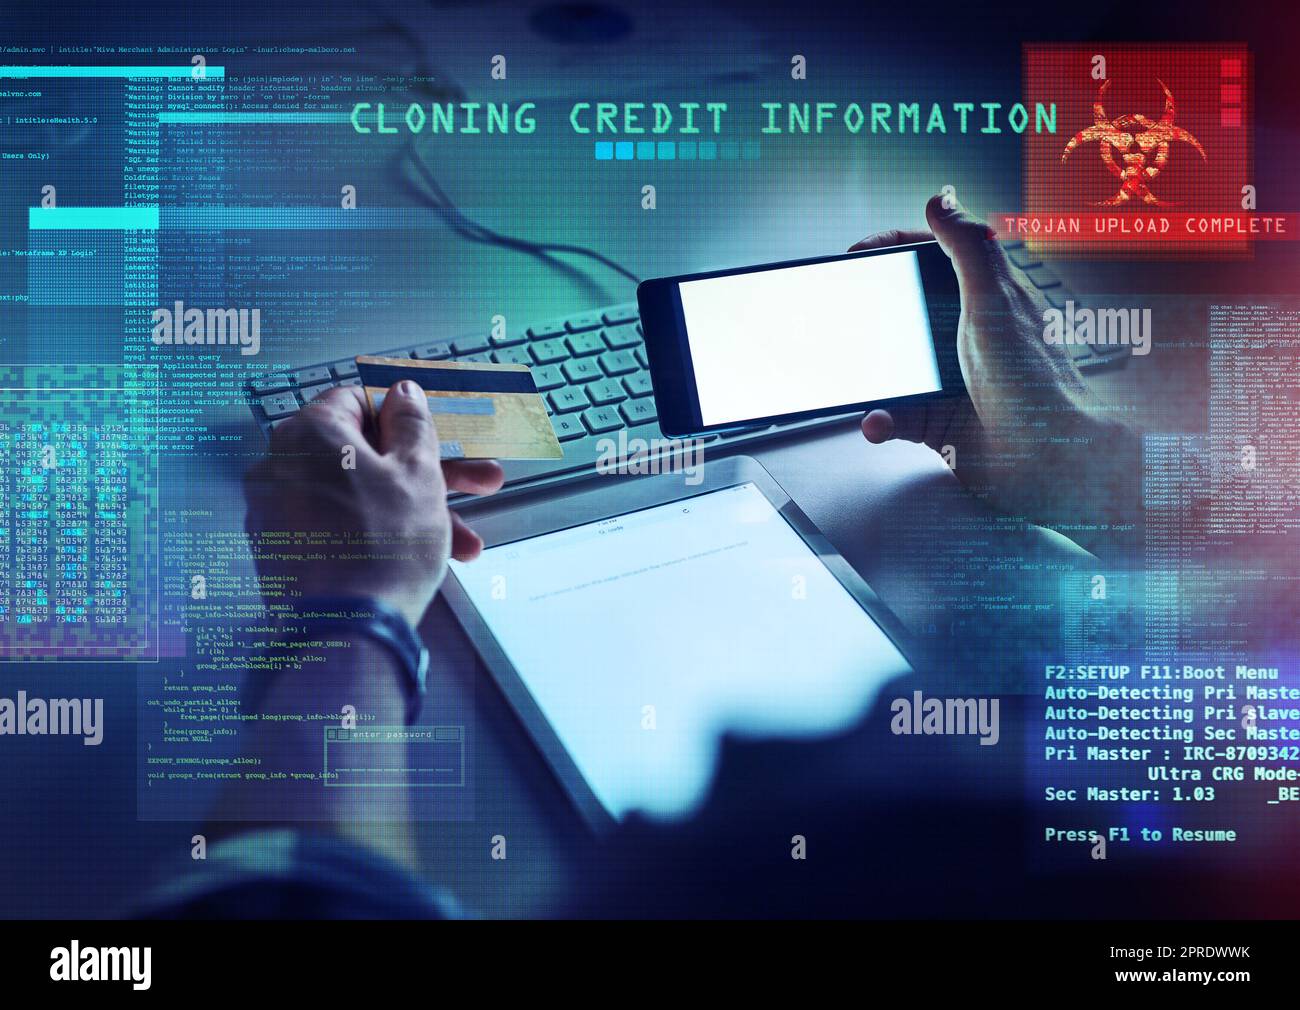 Cyber security, hacking and credit card fraud with cgi, special effects and digital overlay of the hands of a man cloning a bank account and stealing money, finance or information from an online fund Stock Photo